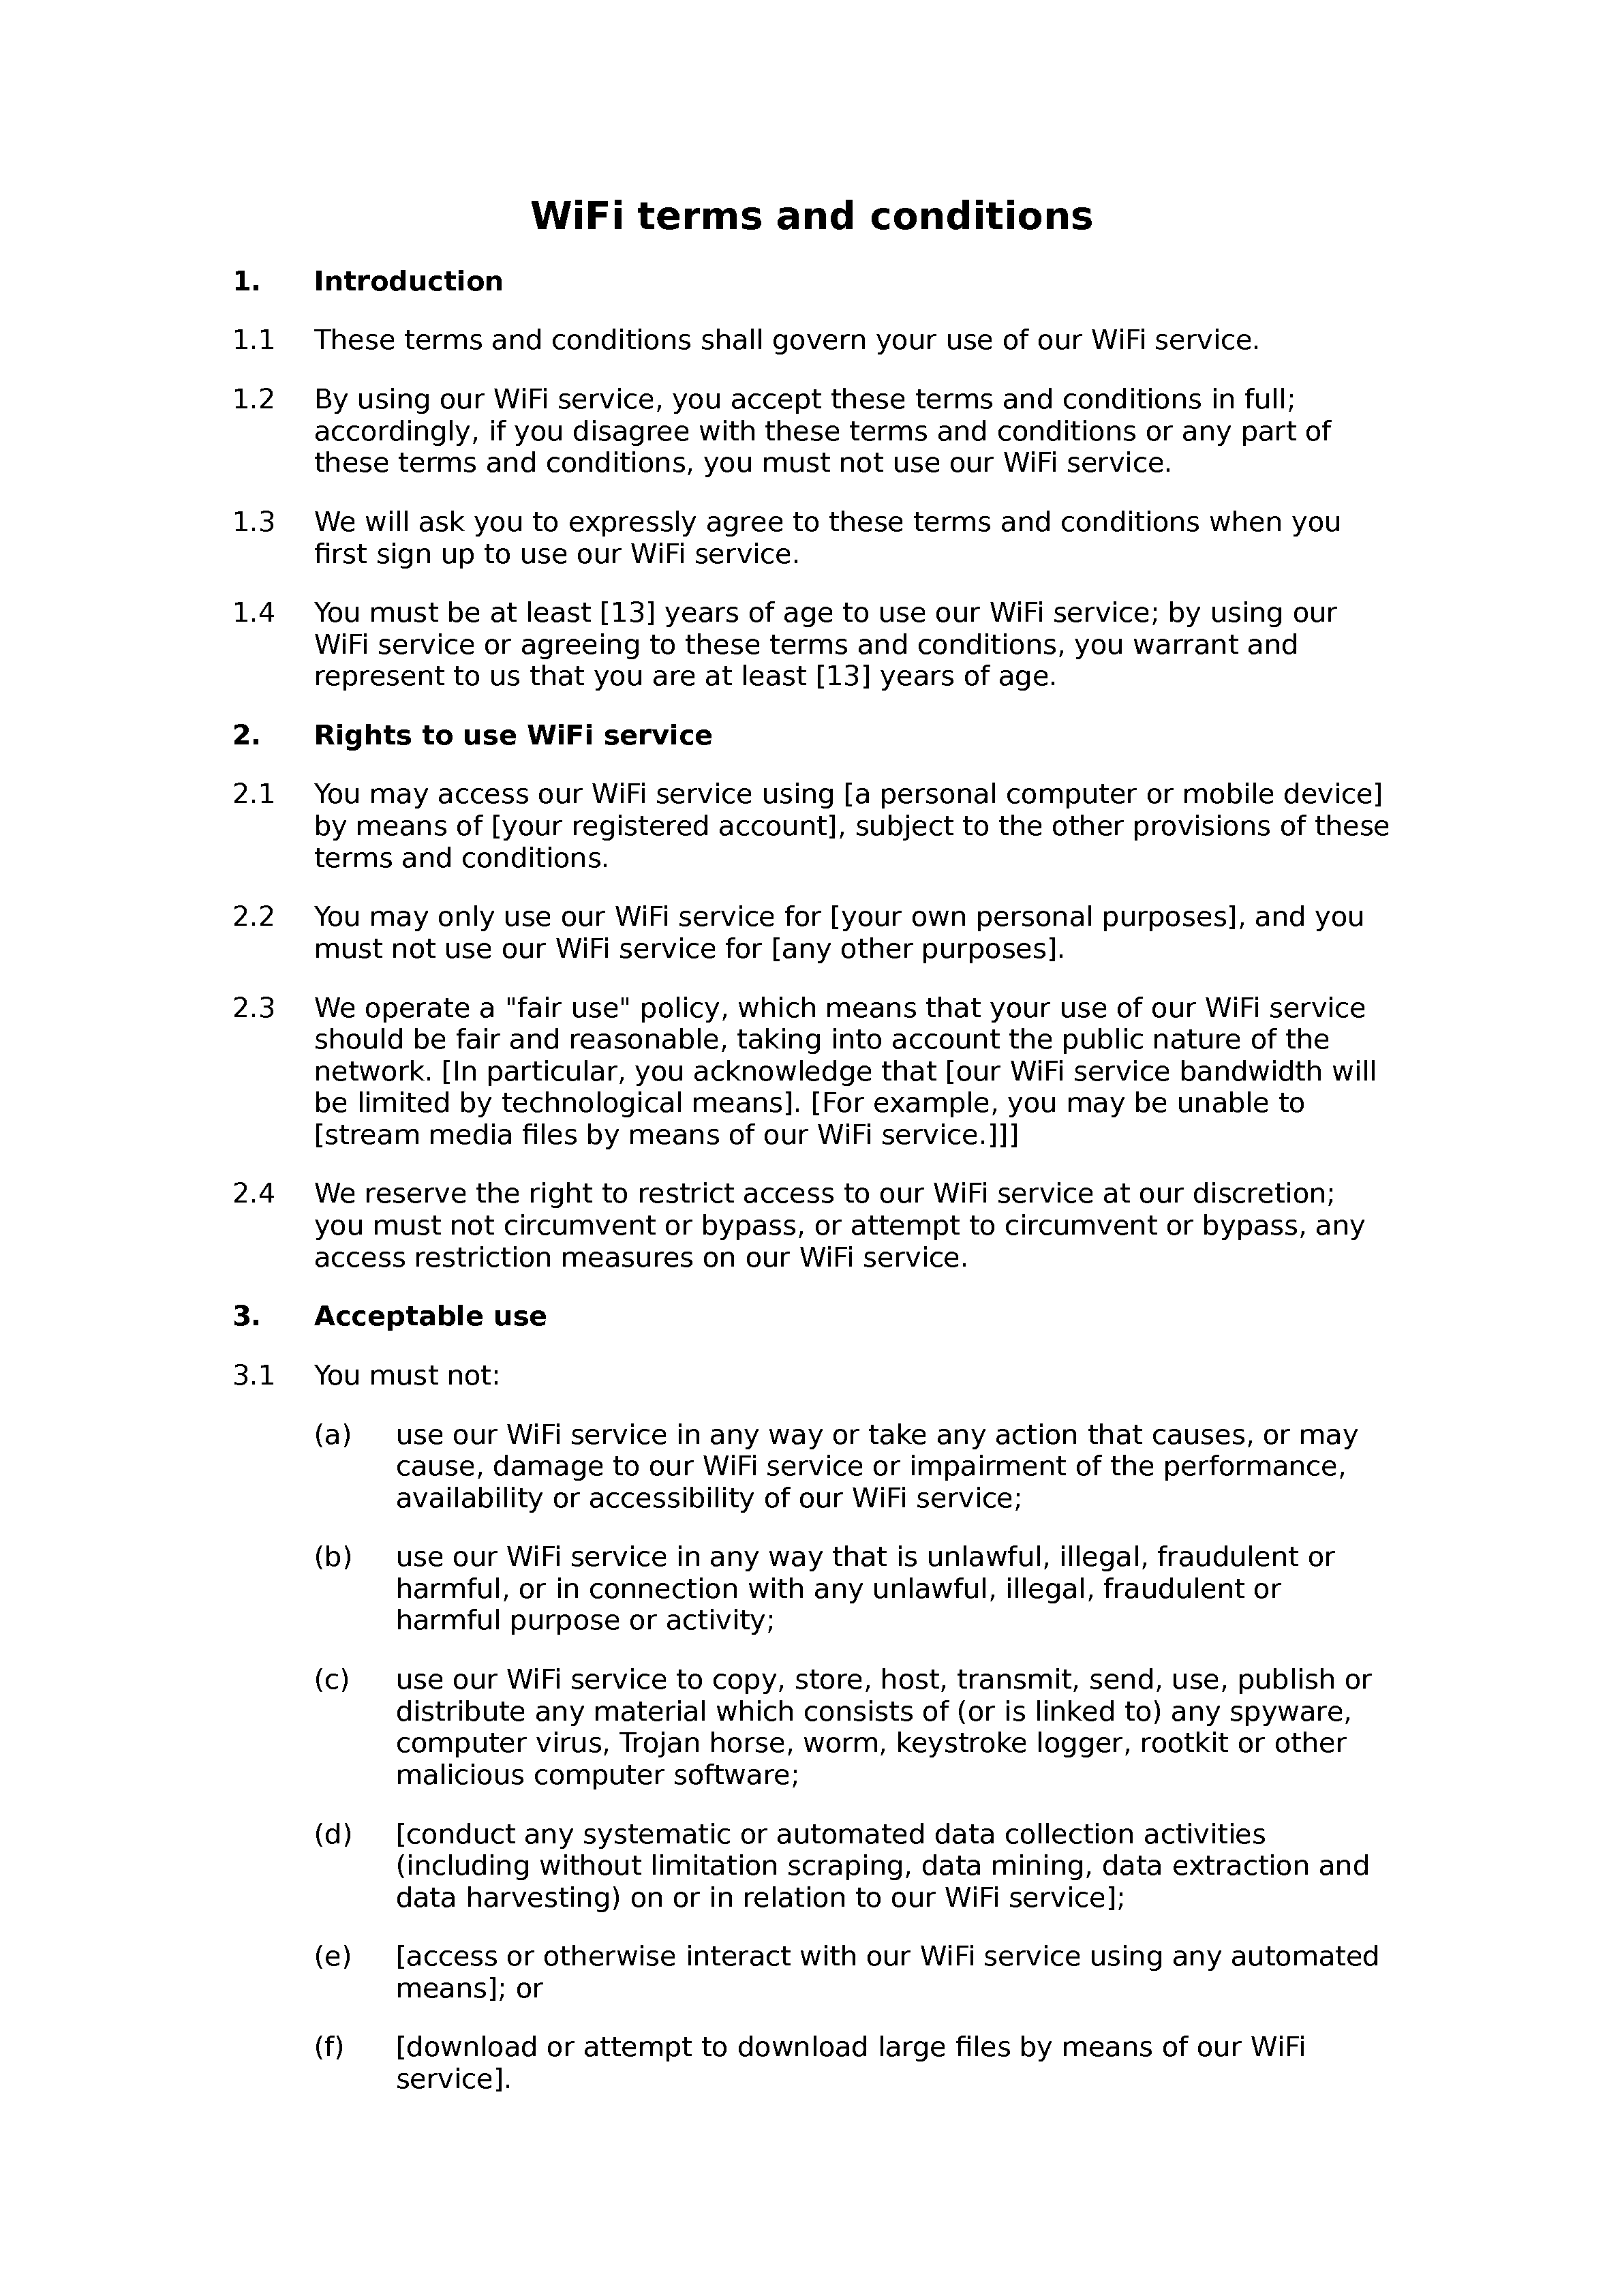 WiFi terms and conditions document preview